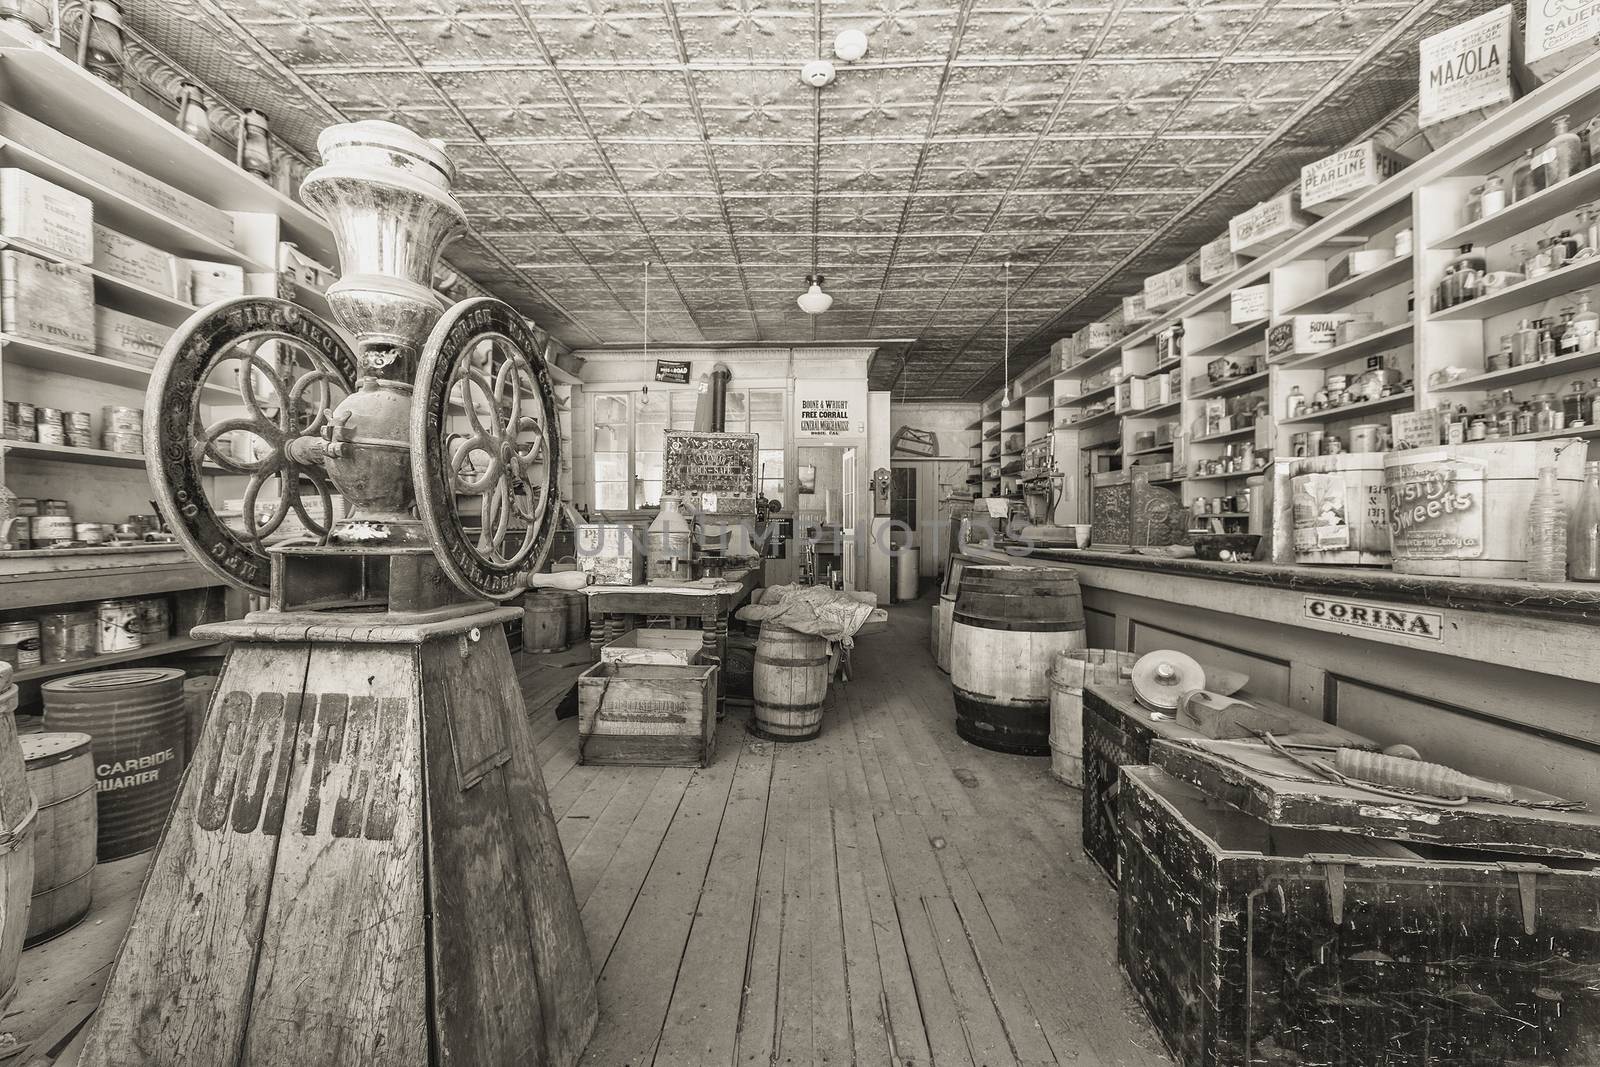 BODIE, MONO COUNTY, CALIFORNIA, USA - SEPTEMBER 22:  Historic Bodie store stocked with provisions as they appeared when it was abandoned in 1915, on September 22, 2015 in Bodie, California, USA.